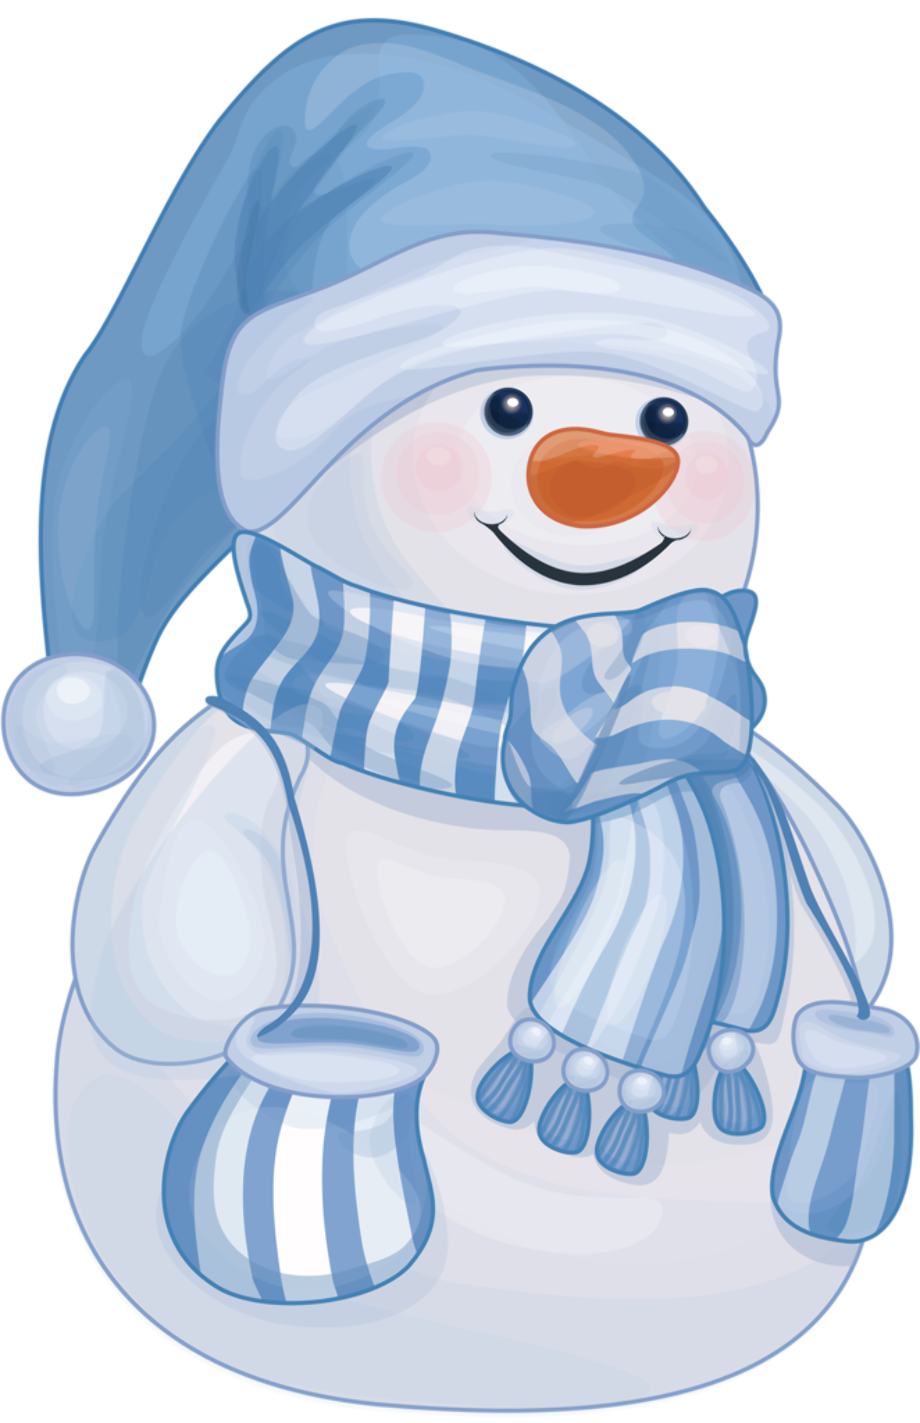 download-high-quality-january-clipart-snowman-transparent-png-images